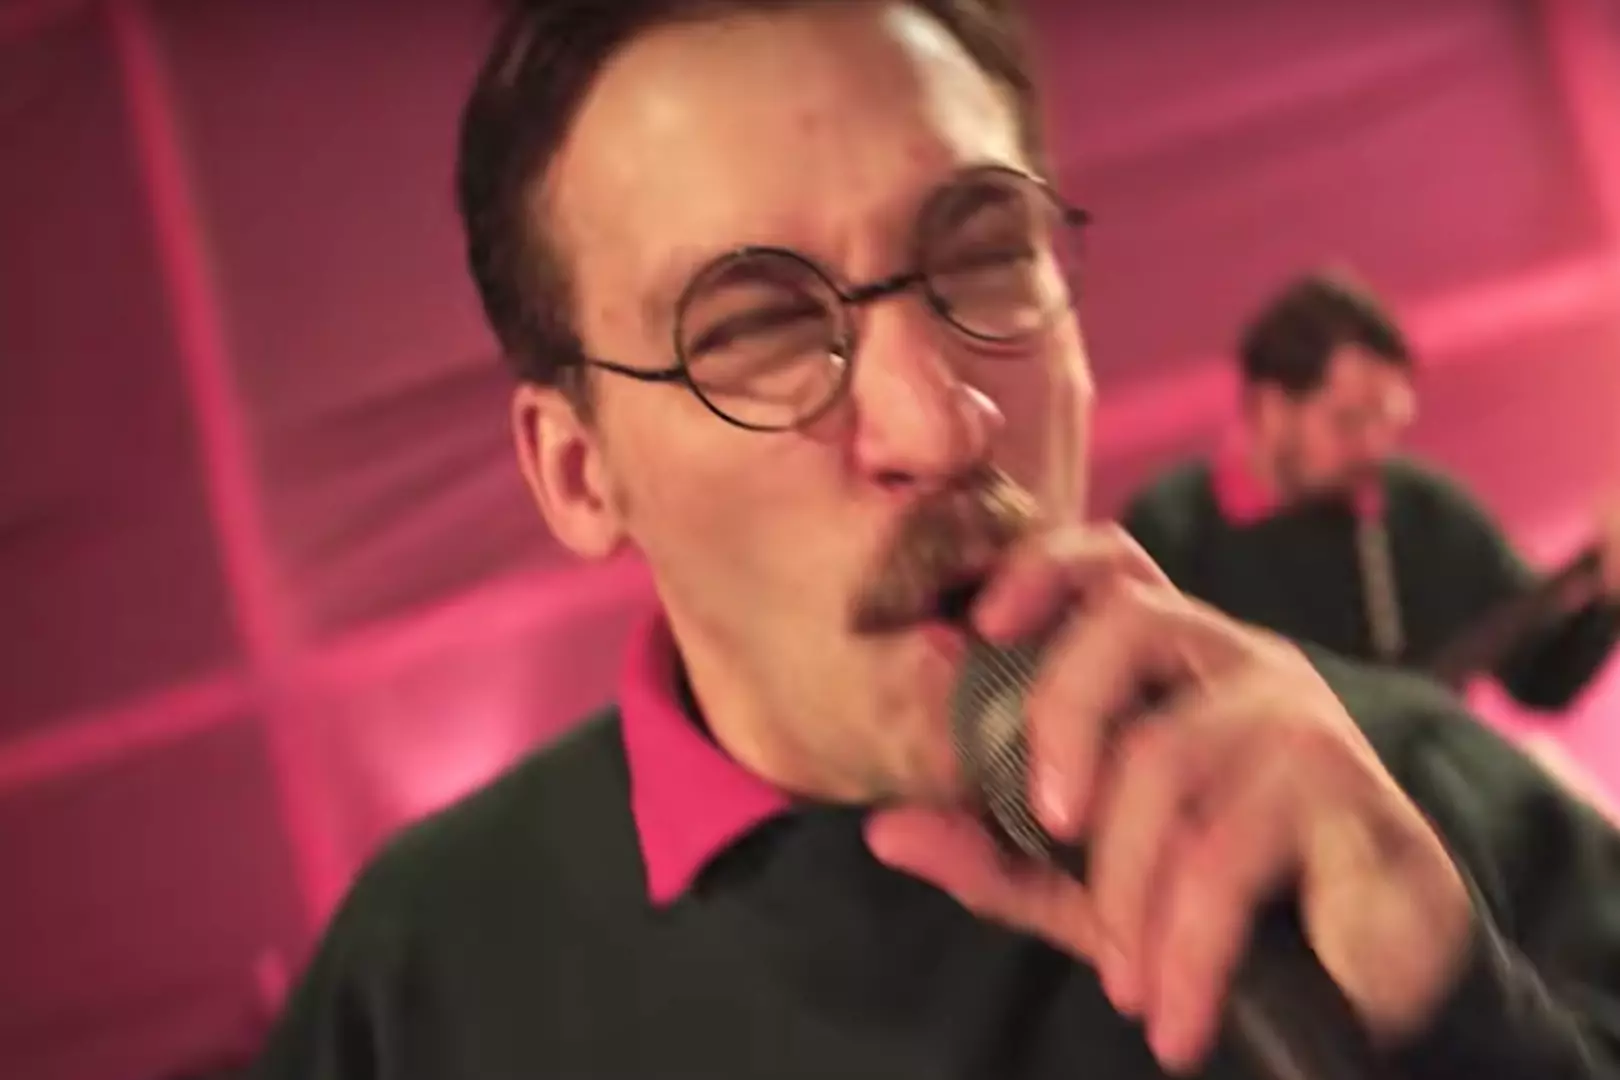 Ned Flanders Metal Band Okilly Dokilly Perform on 'The Simpsons'